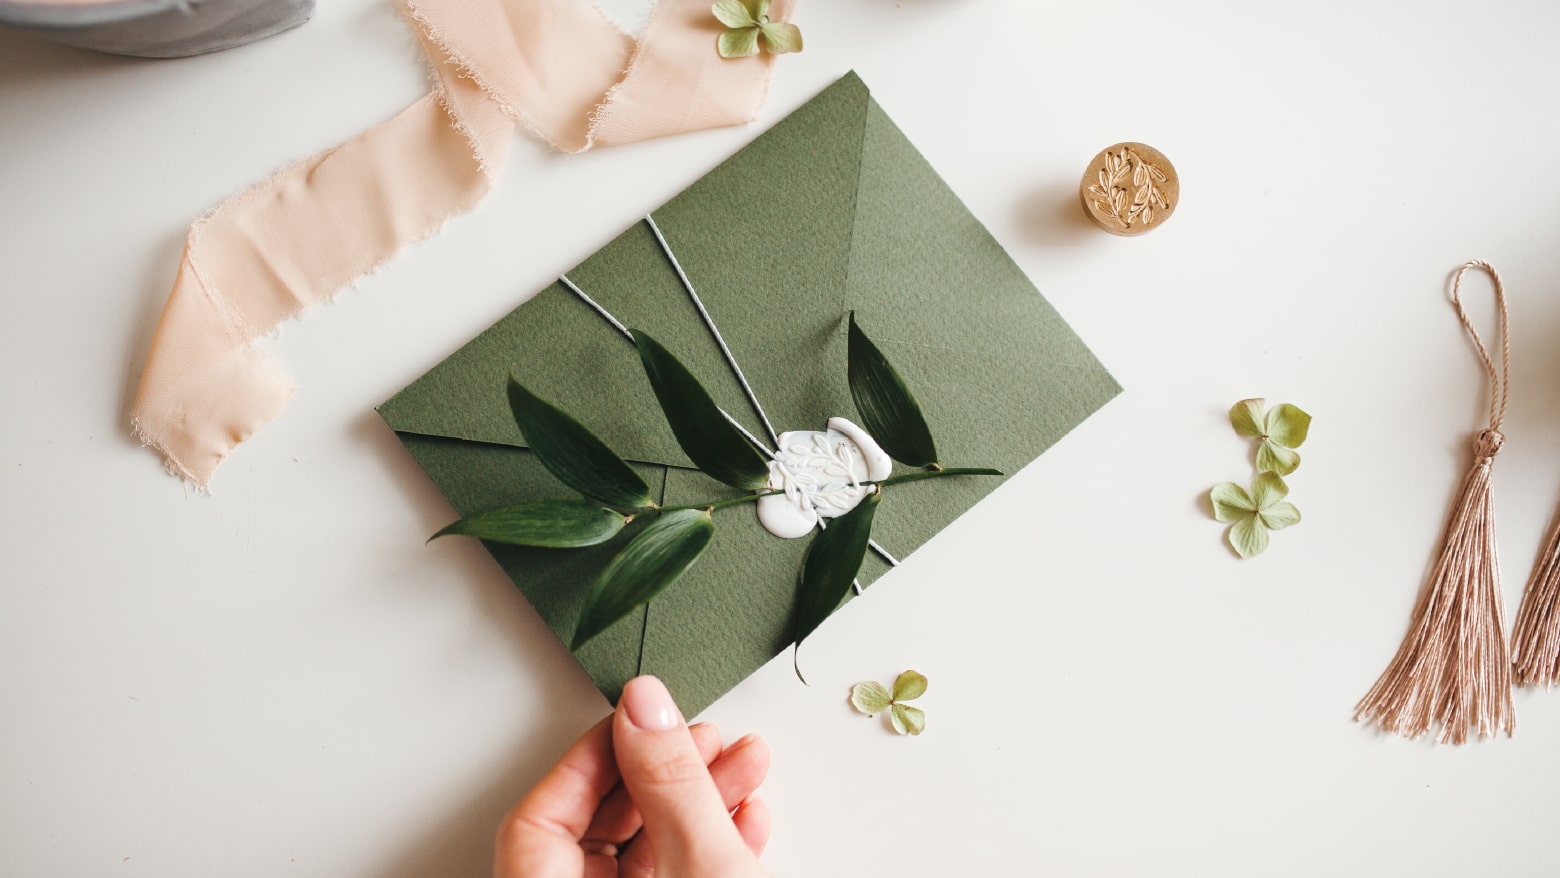 Wedding Invitation Accessories: Enhancing Your Special Day - Crafty Art